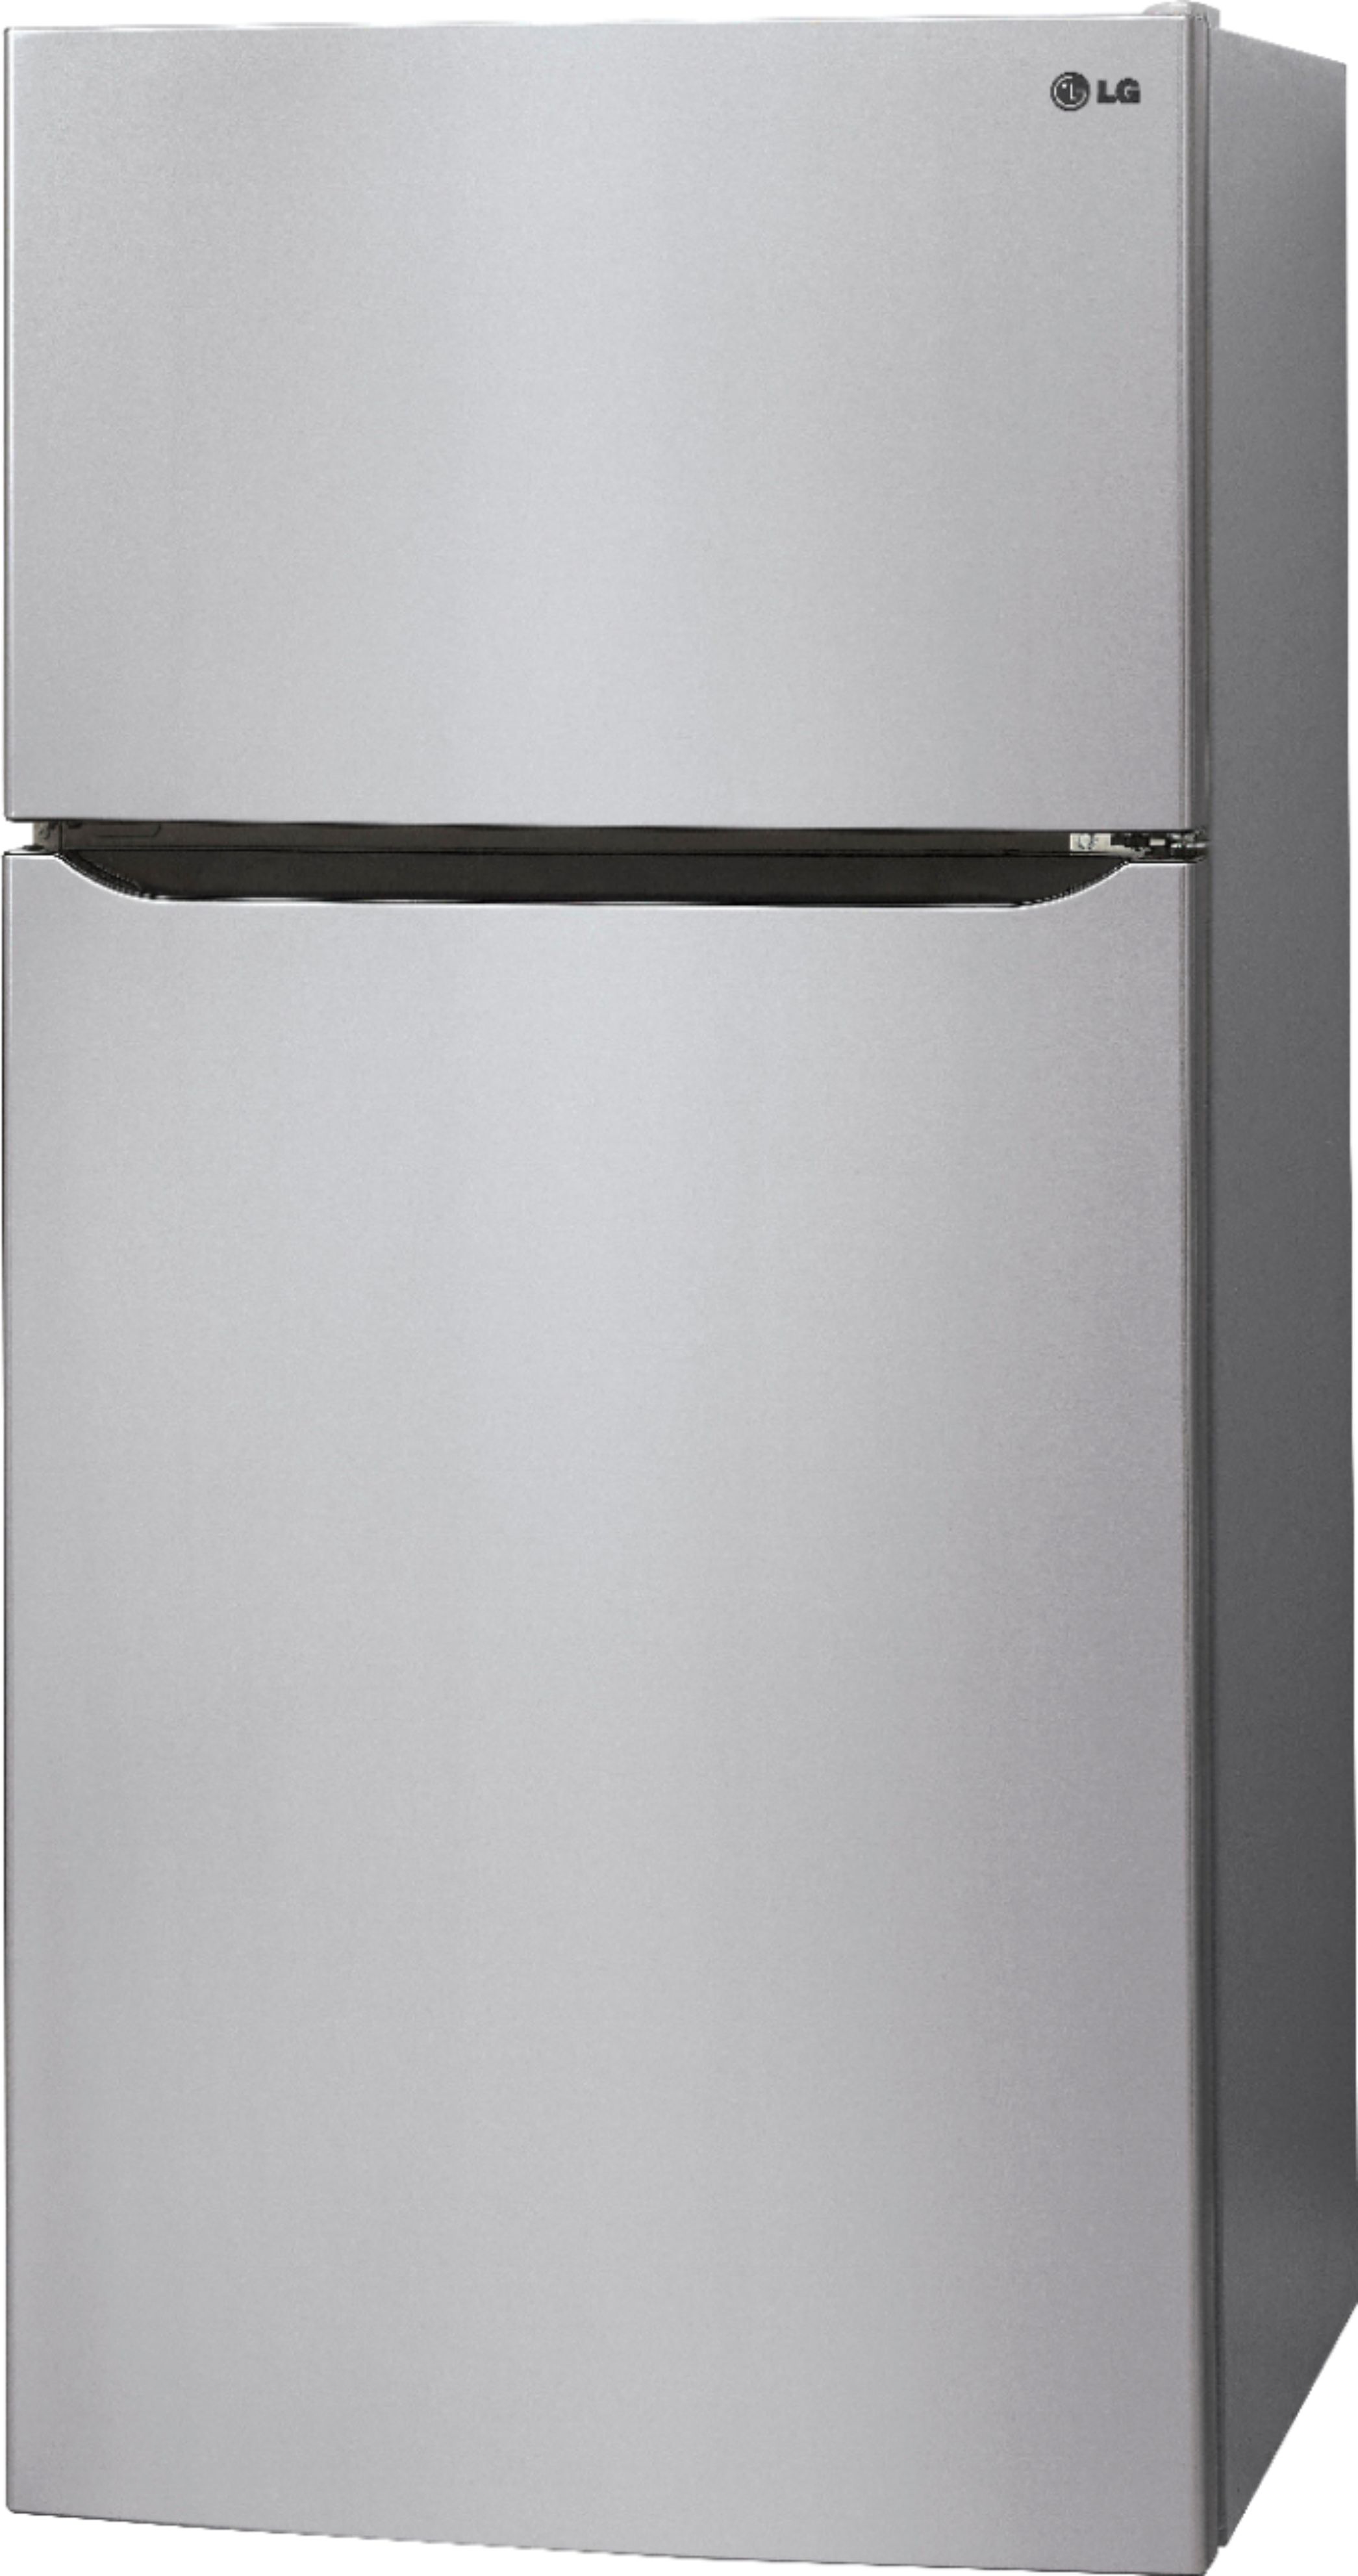 Left View: LG - 23.8 Cu. Ft. Top-Freezer Refrigerator with Ice Maker - Stainless Steel